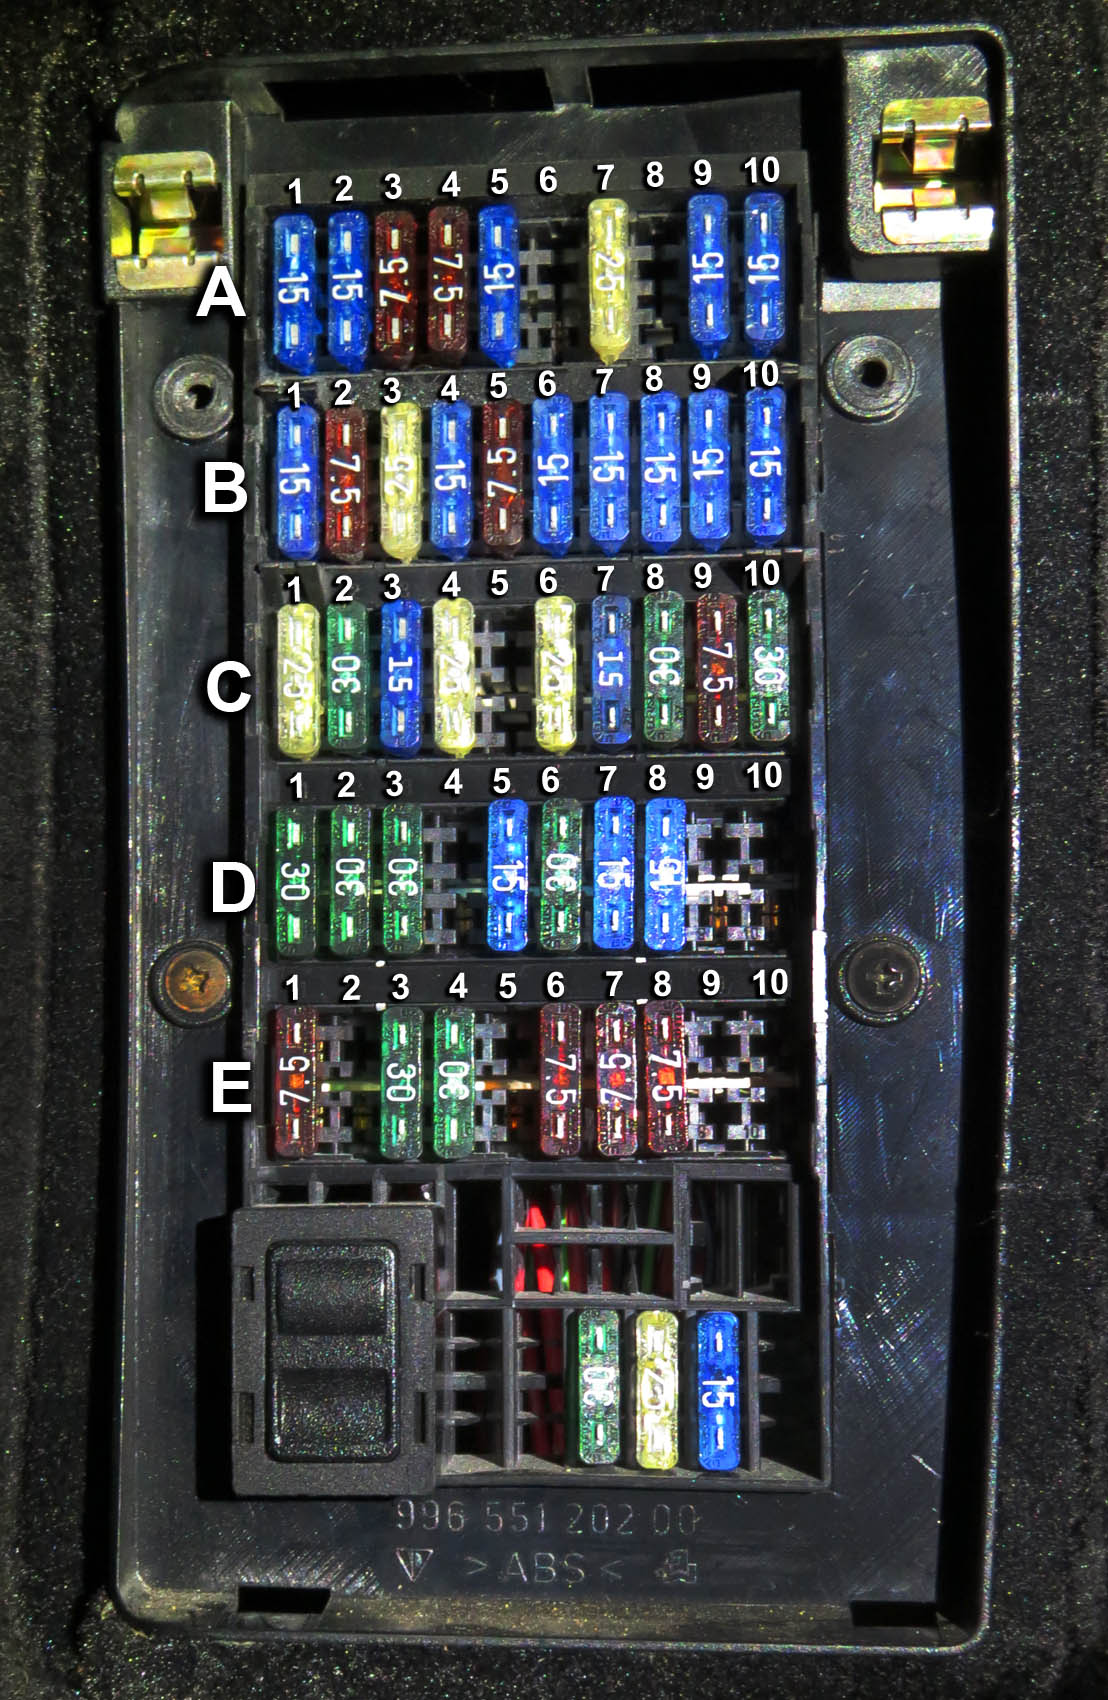 1999 Boxster 2.5 Misfire on Cylinders 4, 5, 6 - Rennlist ... 2001 porsche boxster cayman fuse box car wiring diagram 